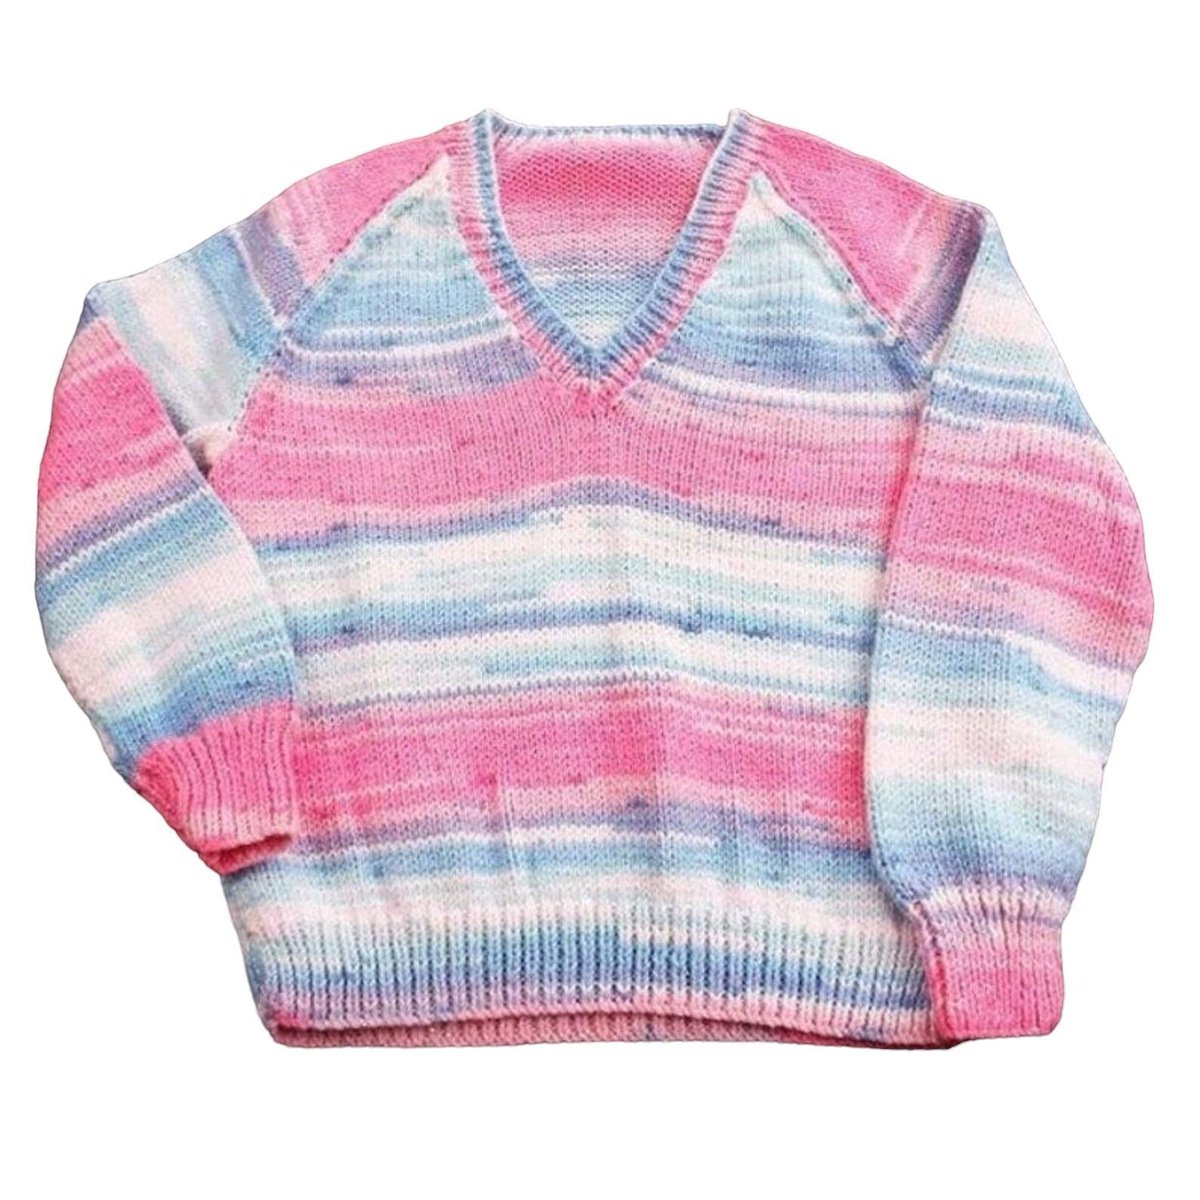 Dazzle your little one with this hand-knitted girls jumper! Featuring a blend of sparkly blue and pink, it's perfect for a 28-inch chest. Discover unique, #Handmade #ChildrensWear in my #Etsy shop knittingtopia.etsy.com/listing/568023… #knittingtopia #MHHSBD #craftbizparty #uksmallbiz